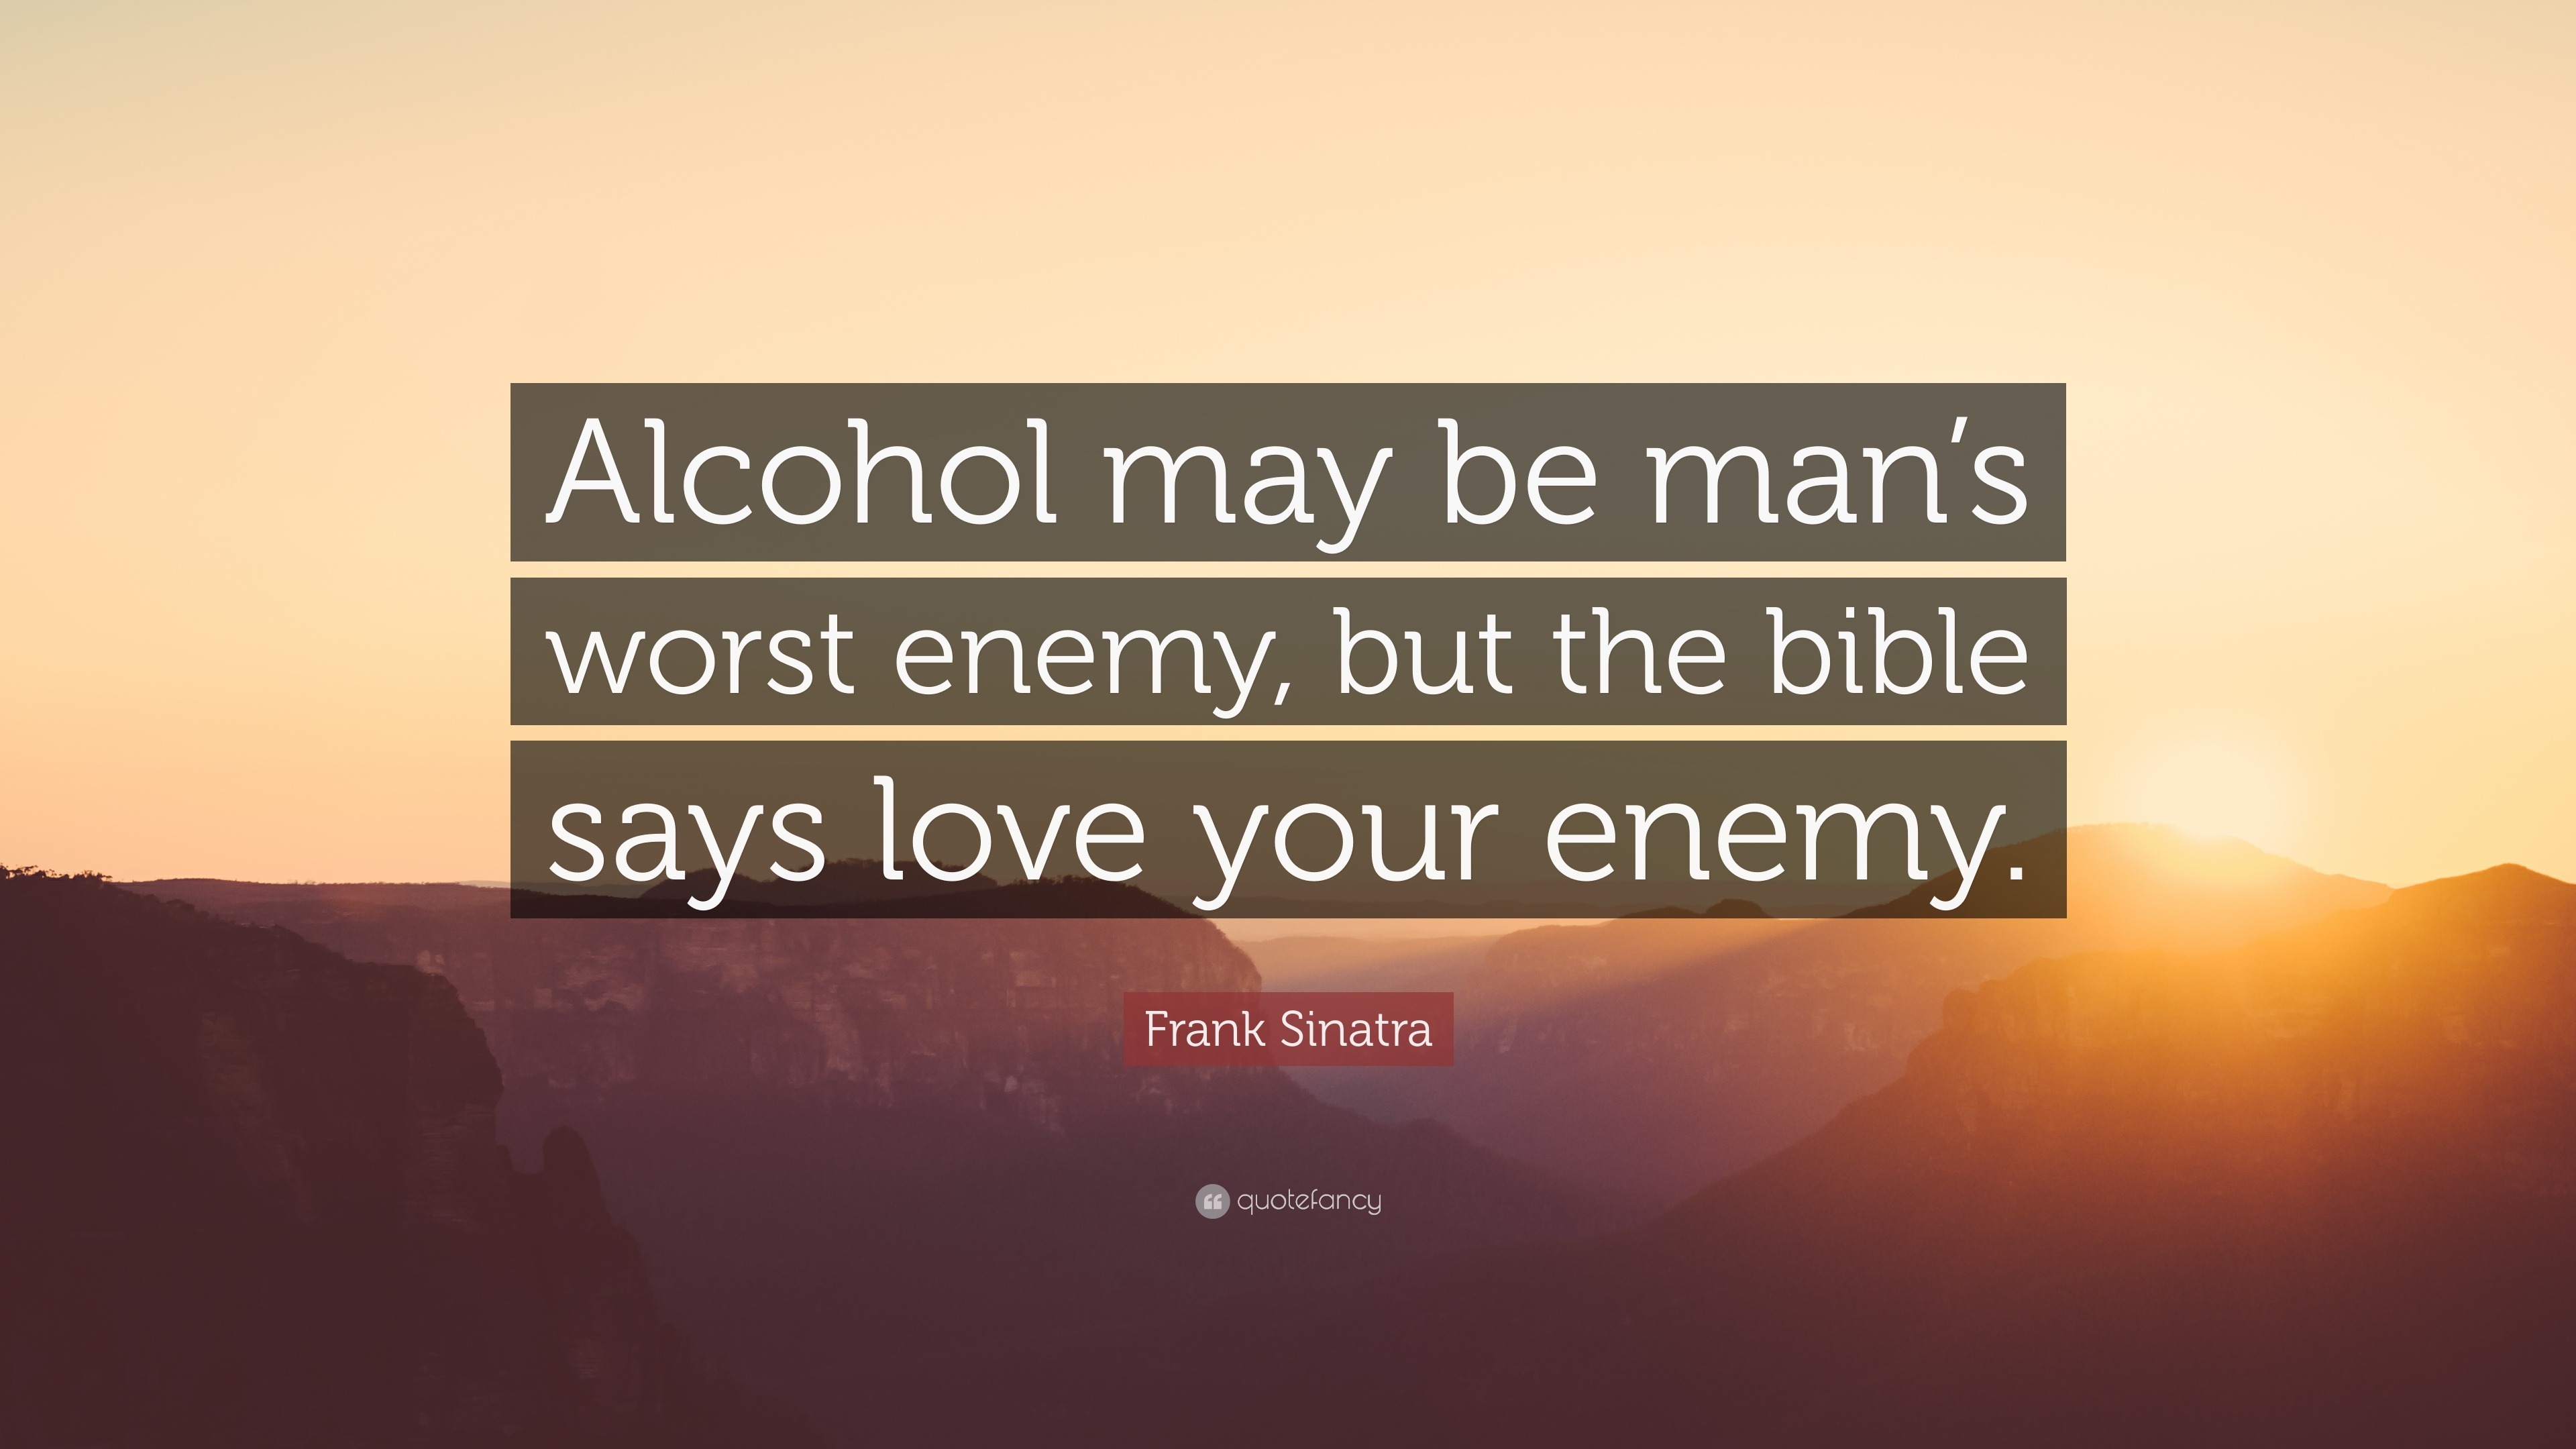 Frank Sinatra Quote “Alcohol may be man s worst enemy but the bible says